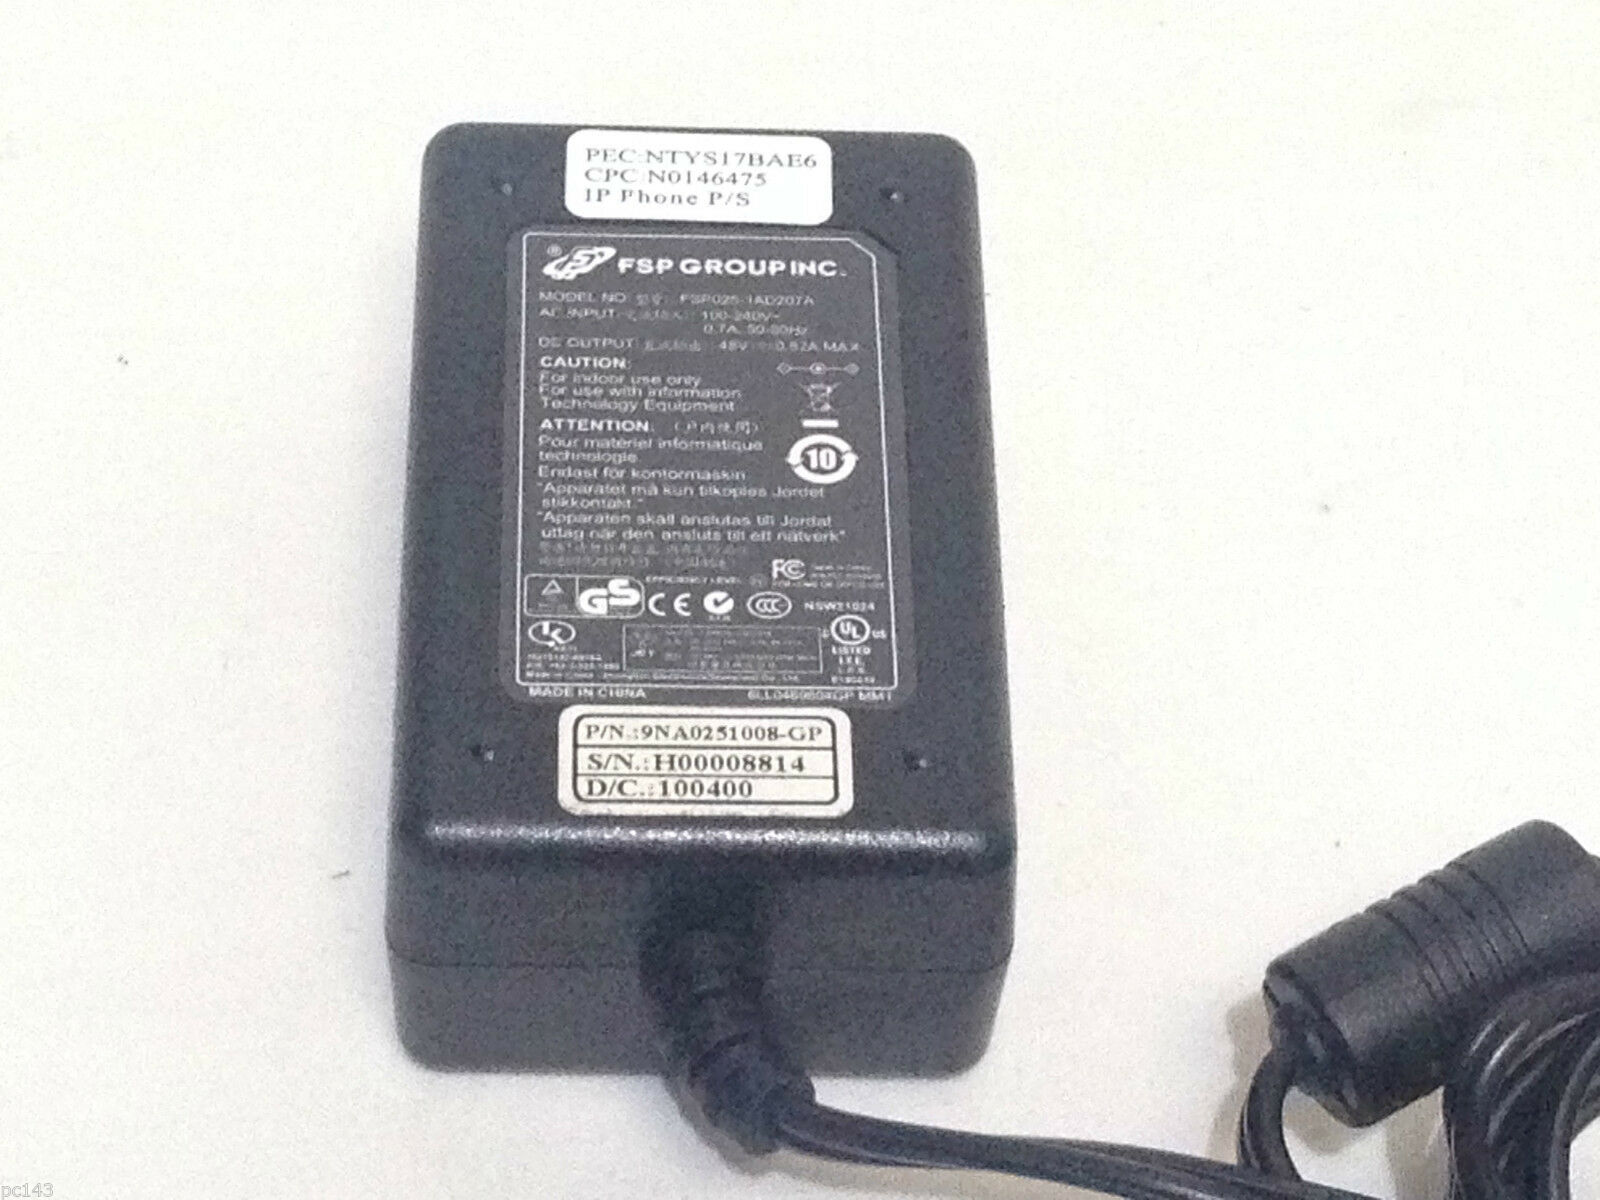 FSP025-1AD207A FSP GROUP INC 48V - 0.52A AC POWER SUPPLY ADAPTER | REF: T507 Brand: FSP Output Current: 0.52A Type: